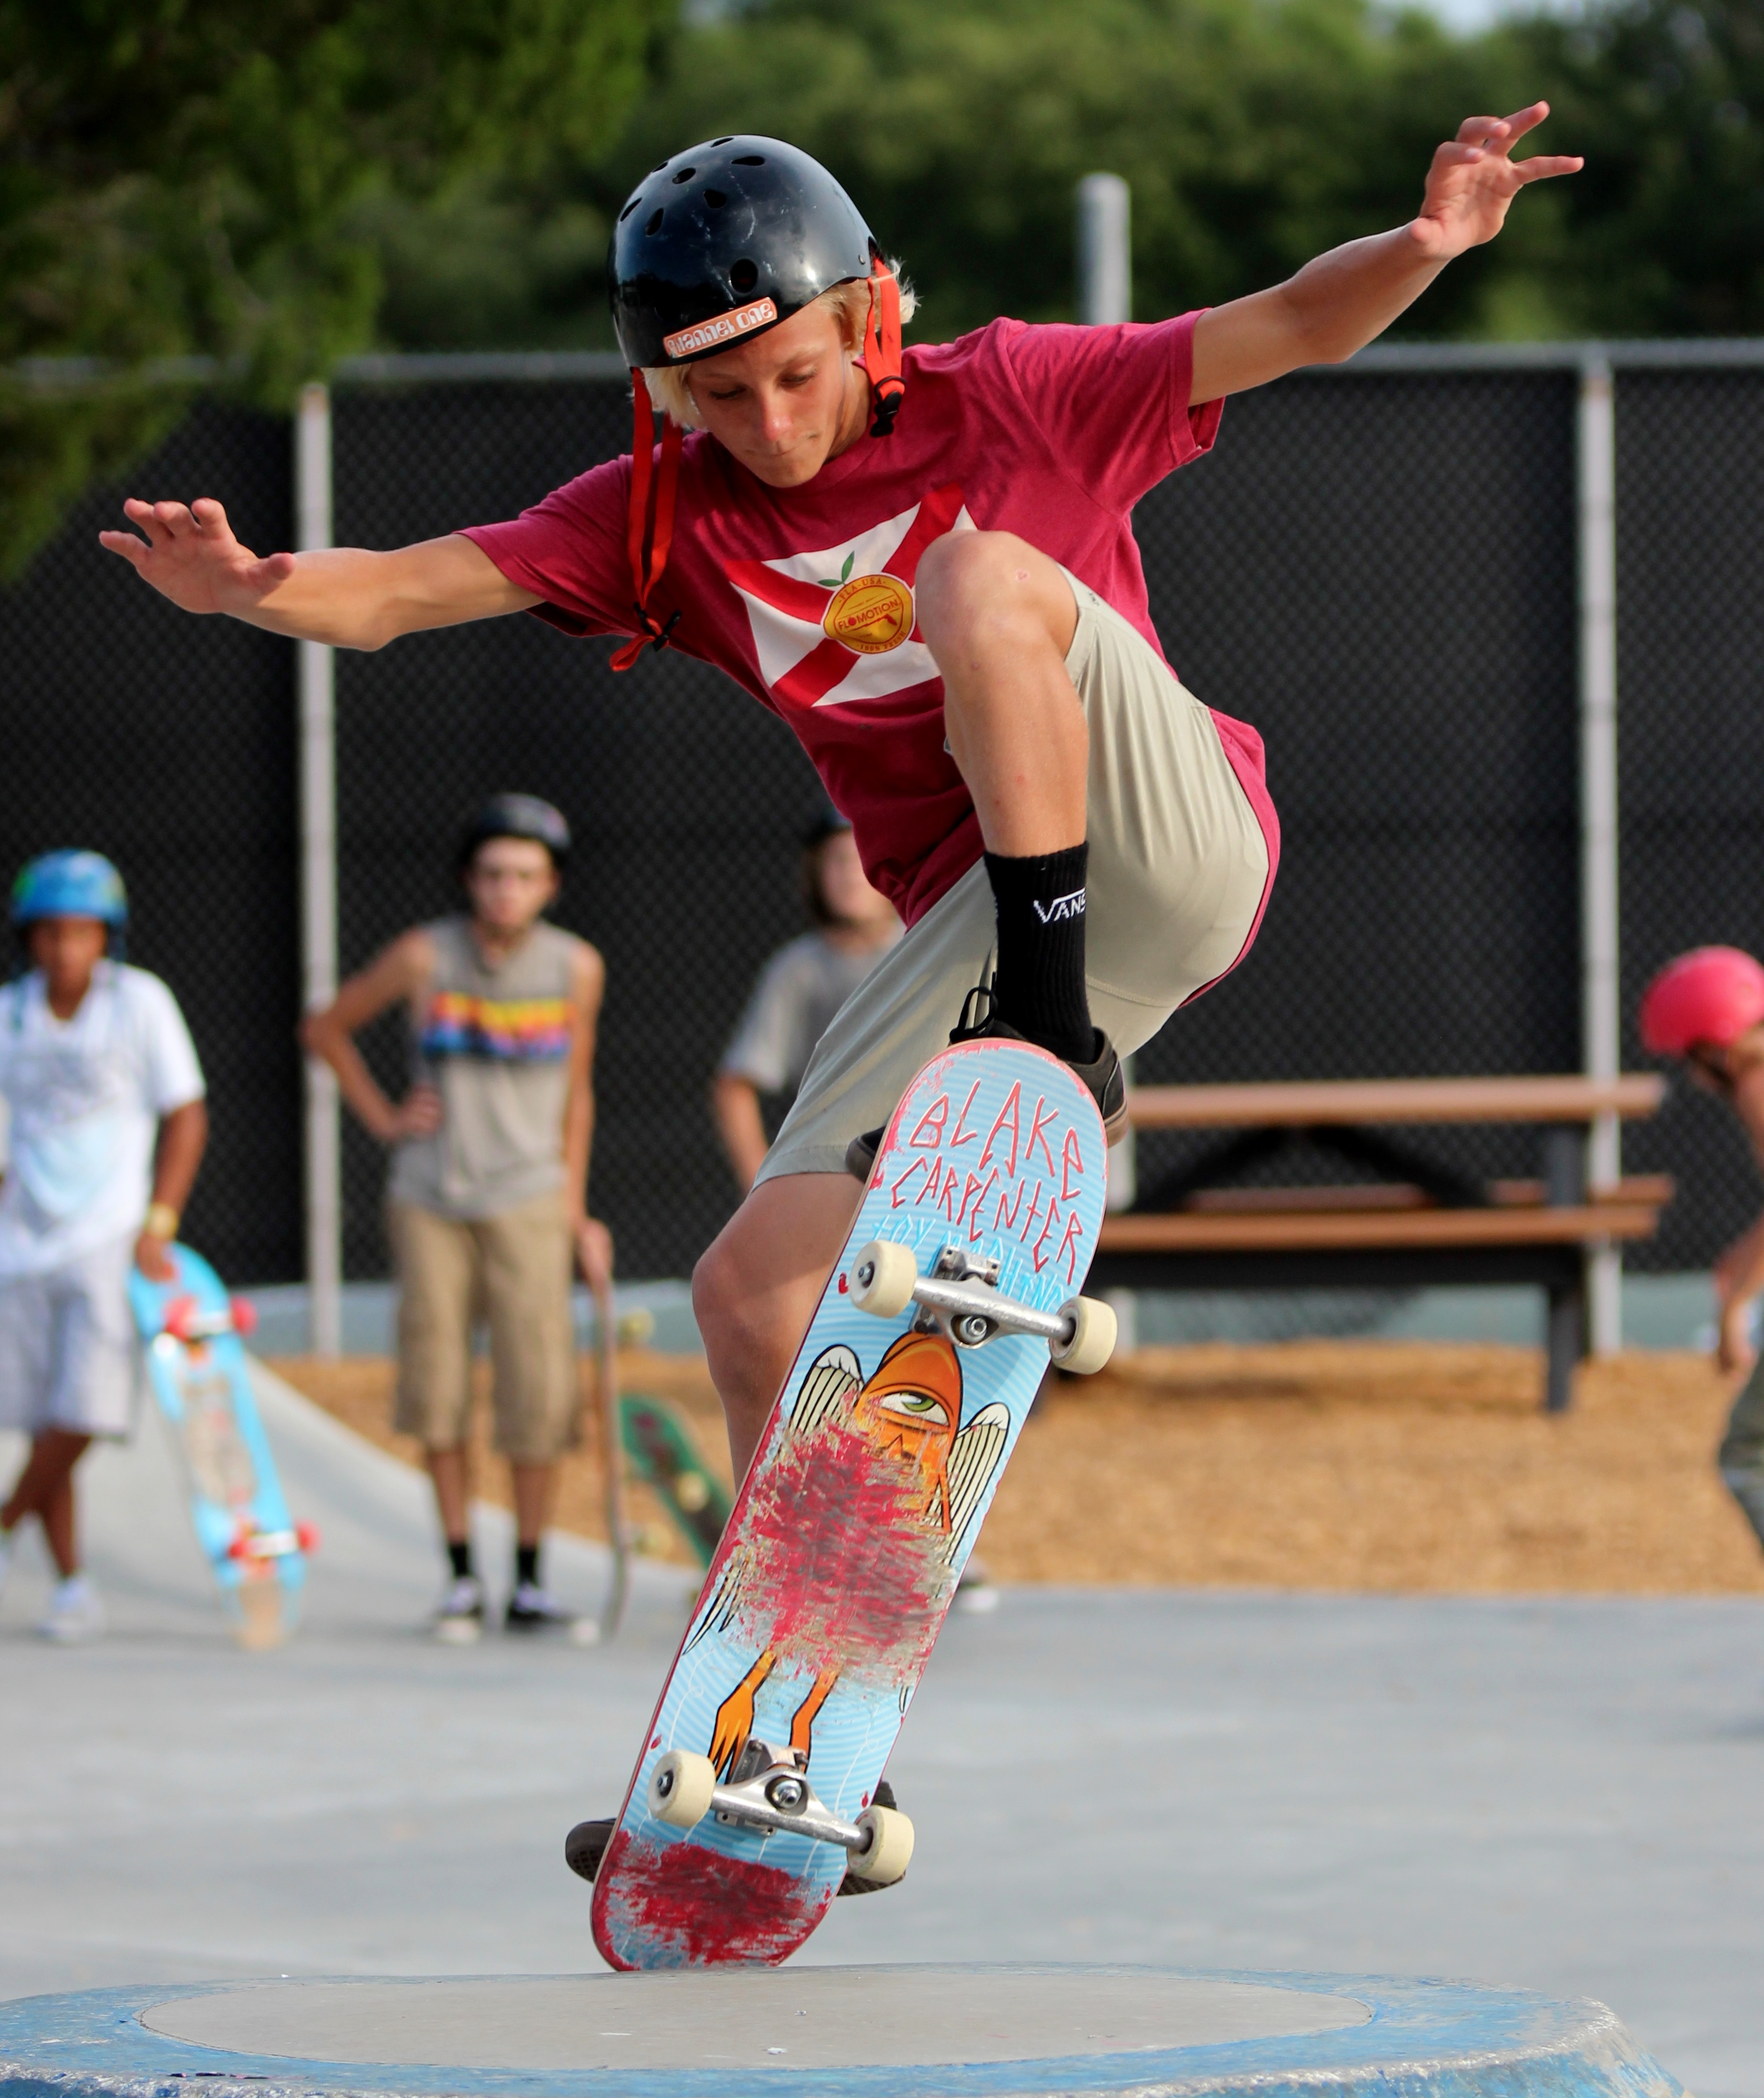 Blake Elmore performs an ollie over the hip.